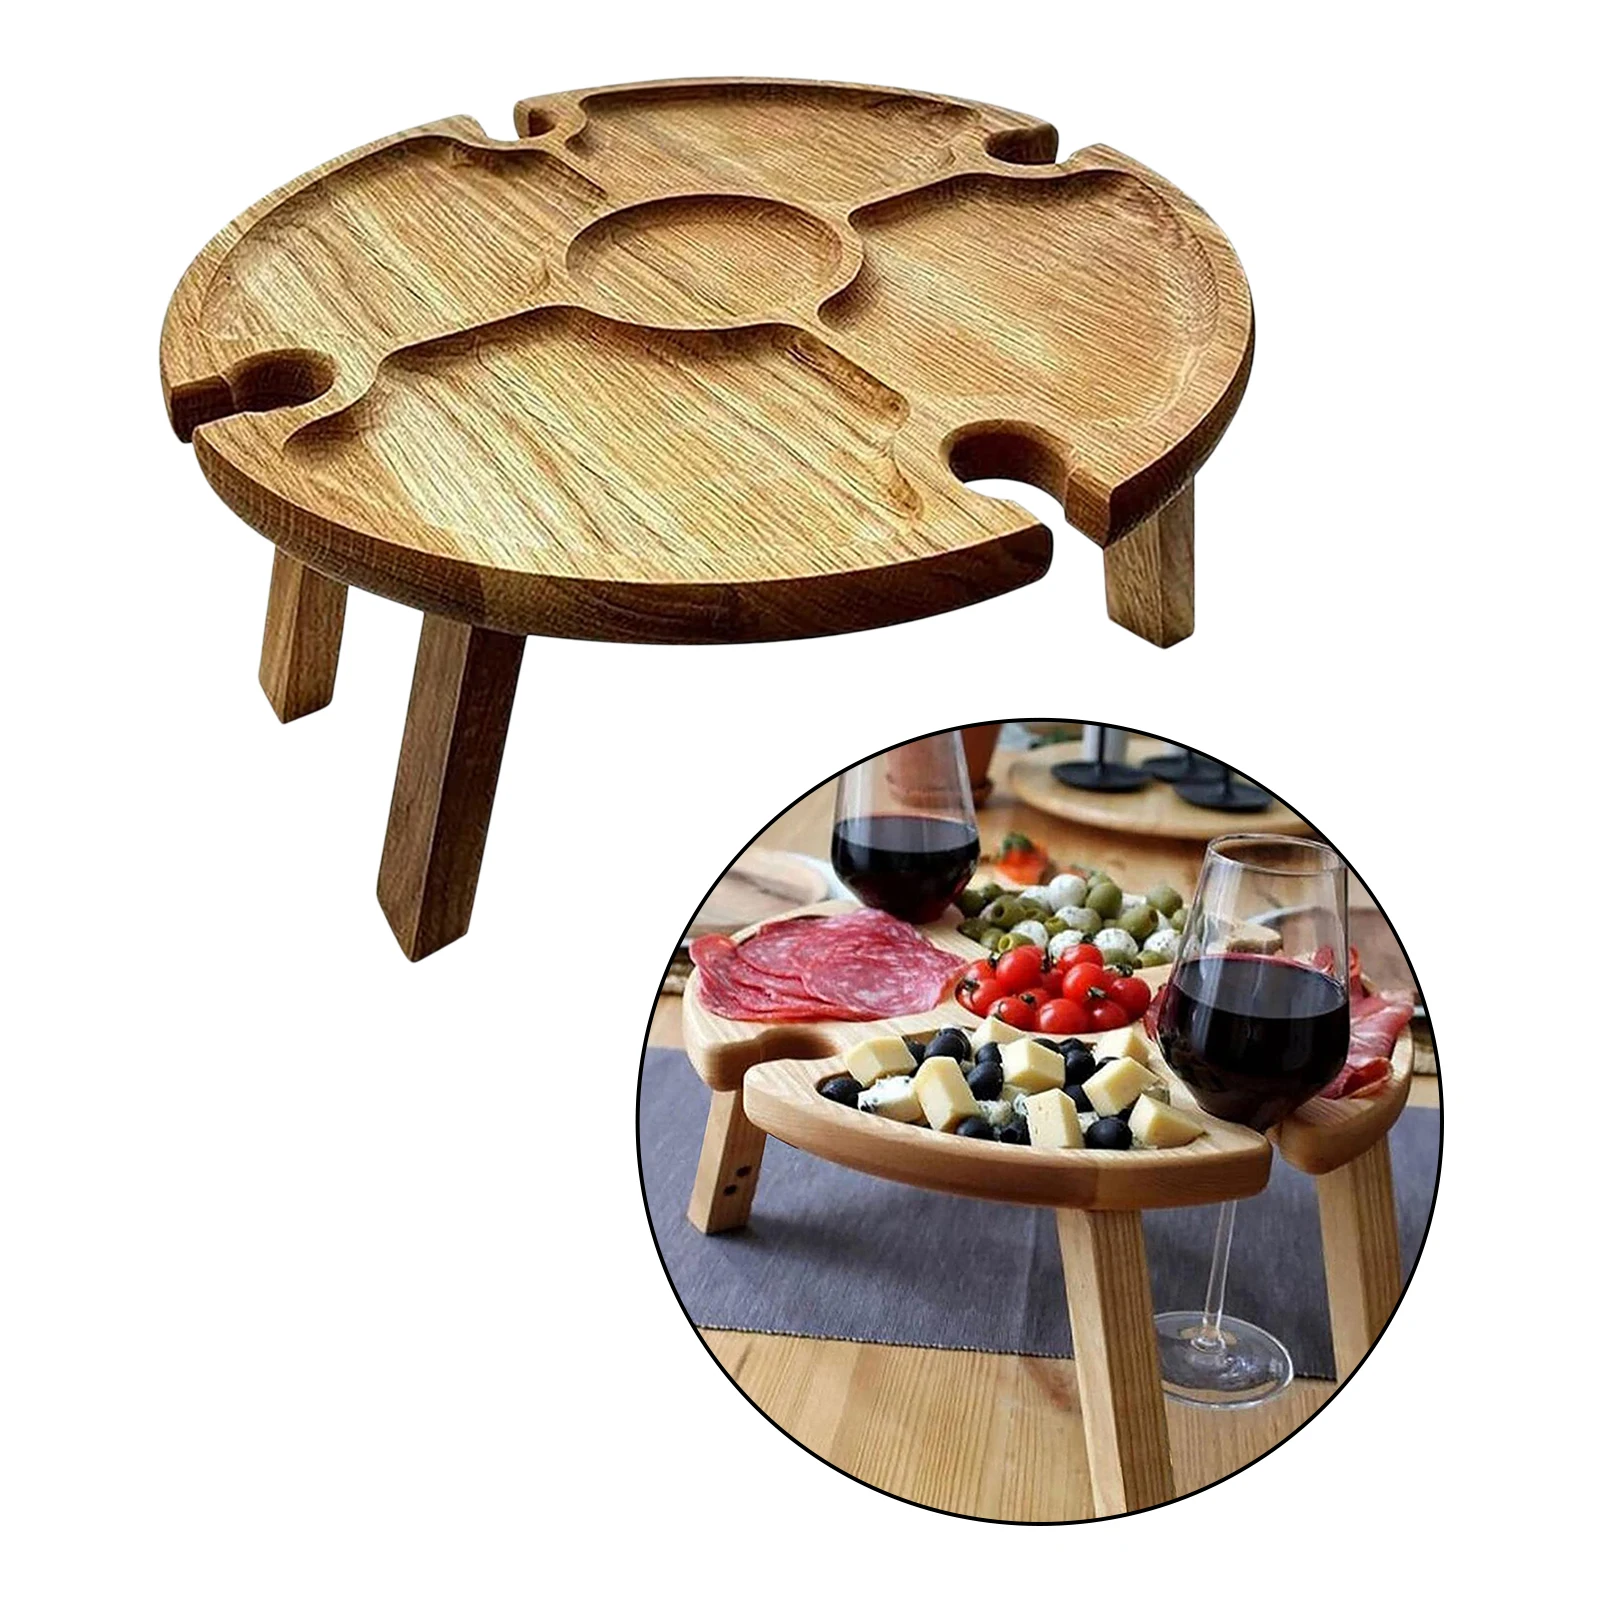 Wooden Outdoor Folding Picnic Table with Glass Holder, Outdoor Portable Picnic Table, 2in1 Wine Glass Rack & Compartmental Dish